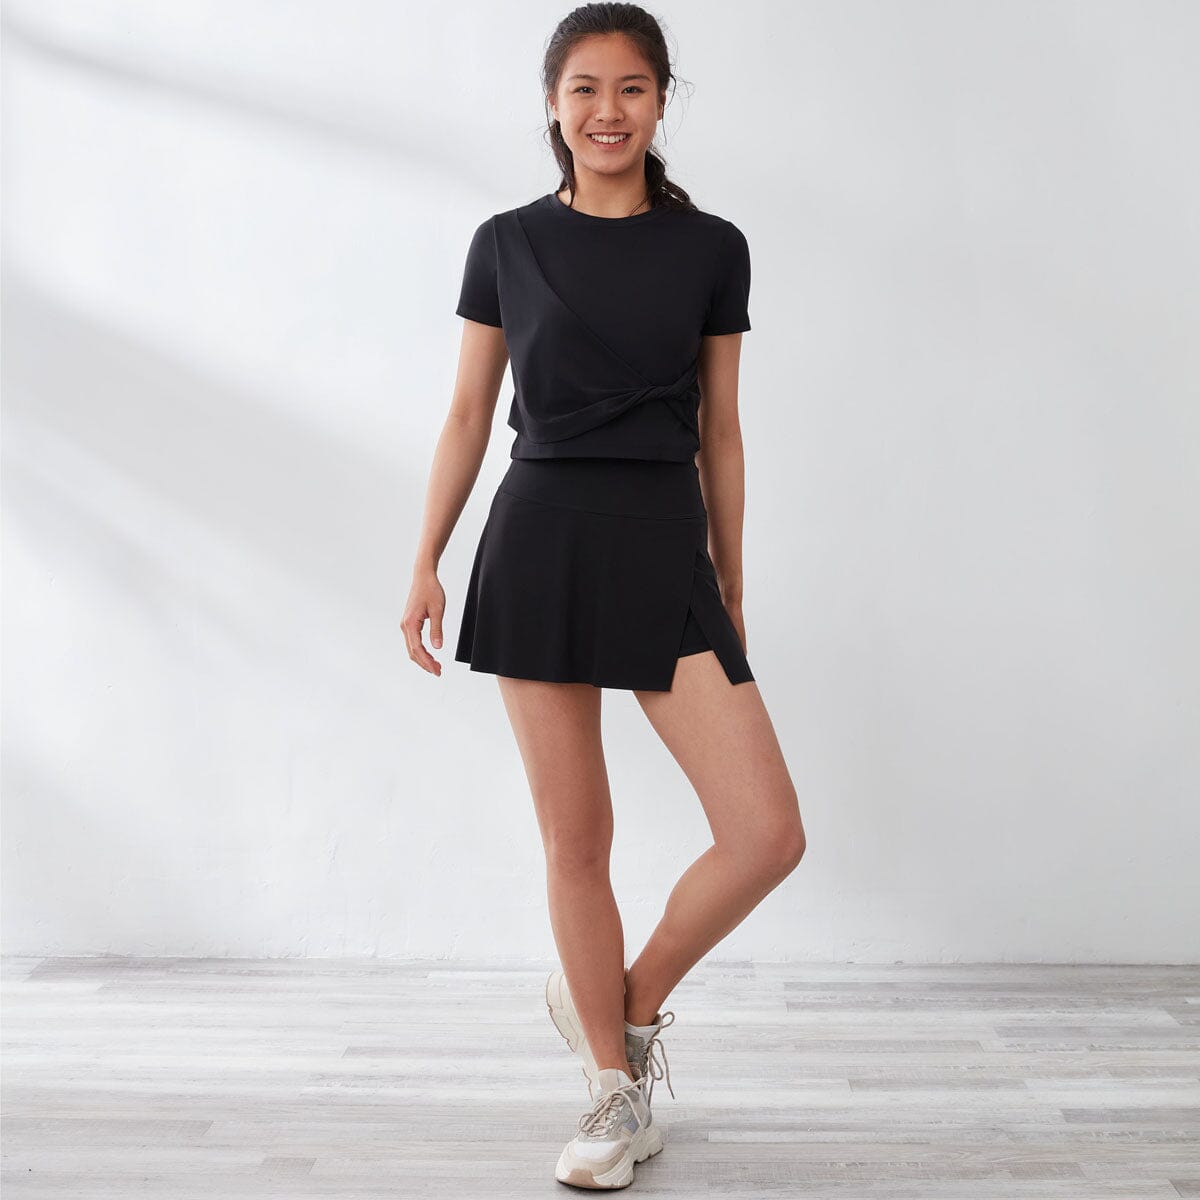 Mid-Waist Float UV Protection Tennis Skirt Skirts Her own words SPORTS 